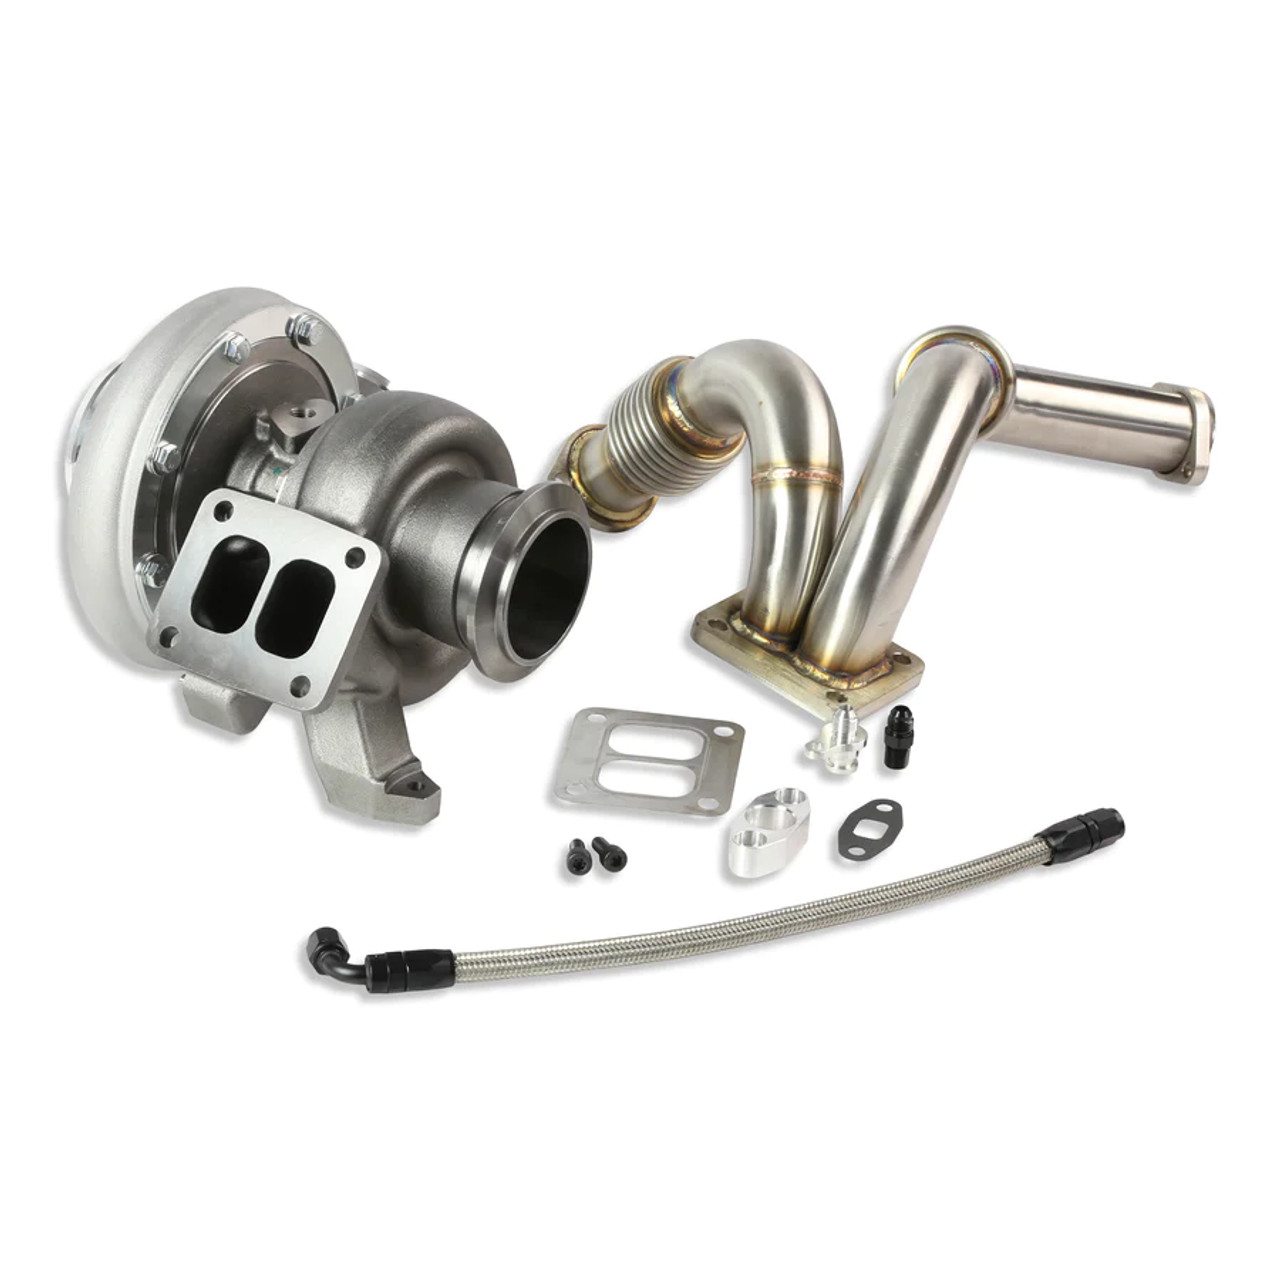 Smeding Diesel Non VGT T4 S300 kit with Turbo Gen 2 for 2003 to 2007 Ford 6.0L Powerstroke (SD-NONVGT_S300_6.0L) Main VIew